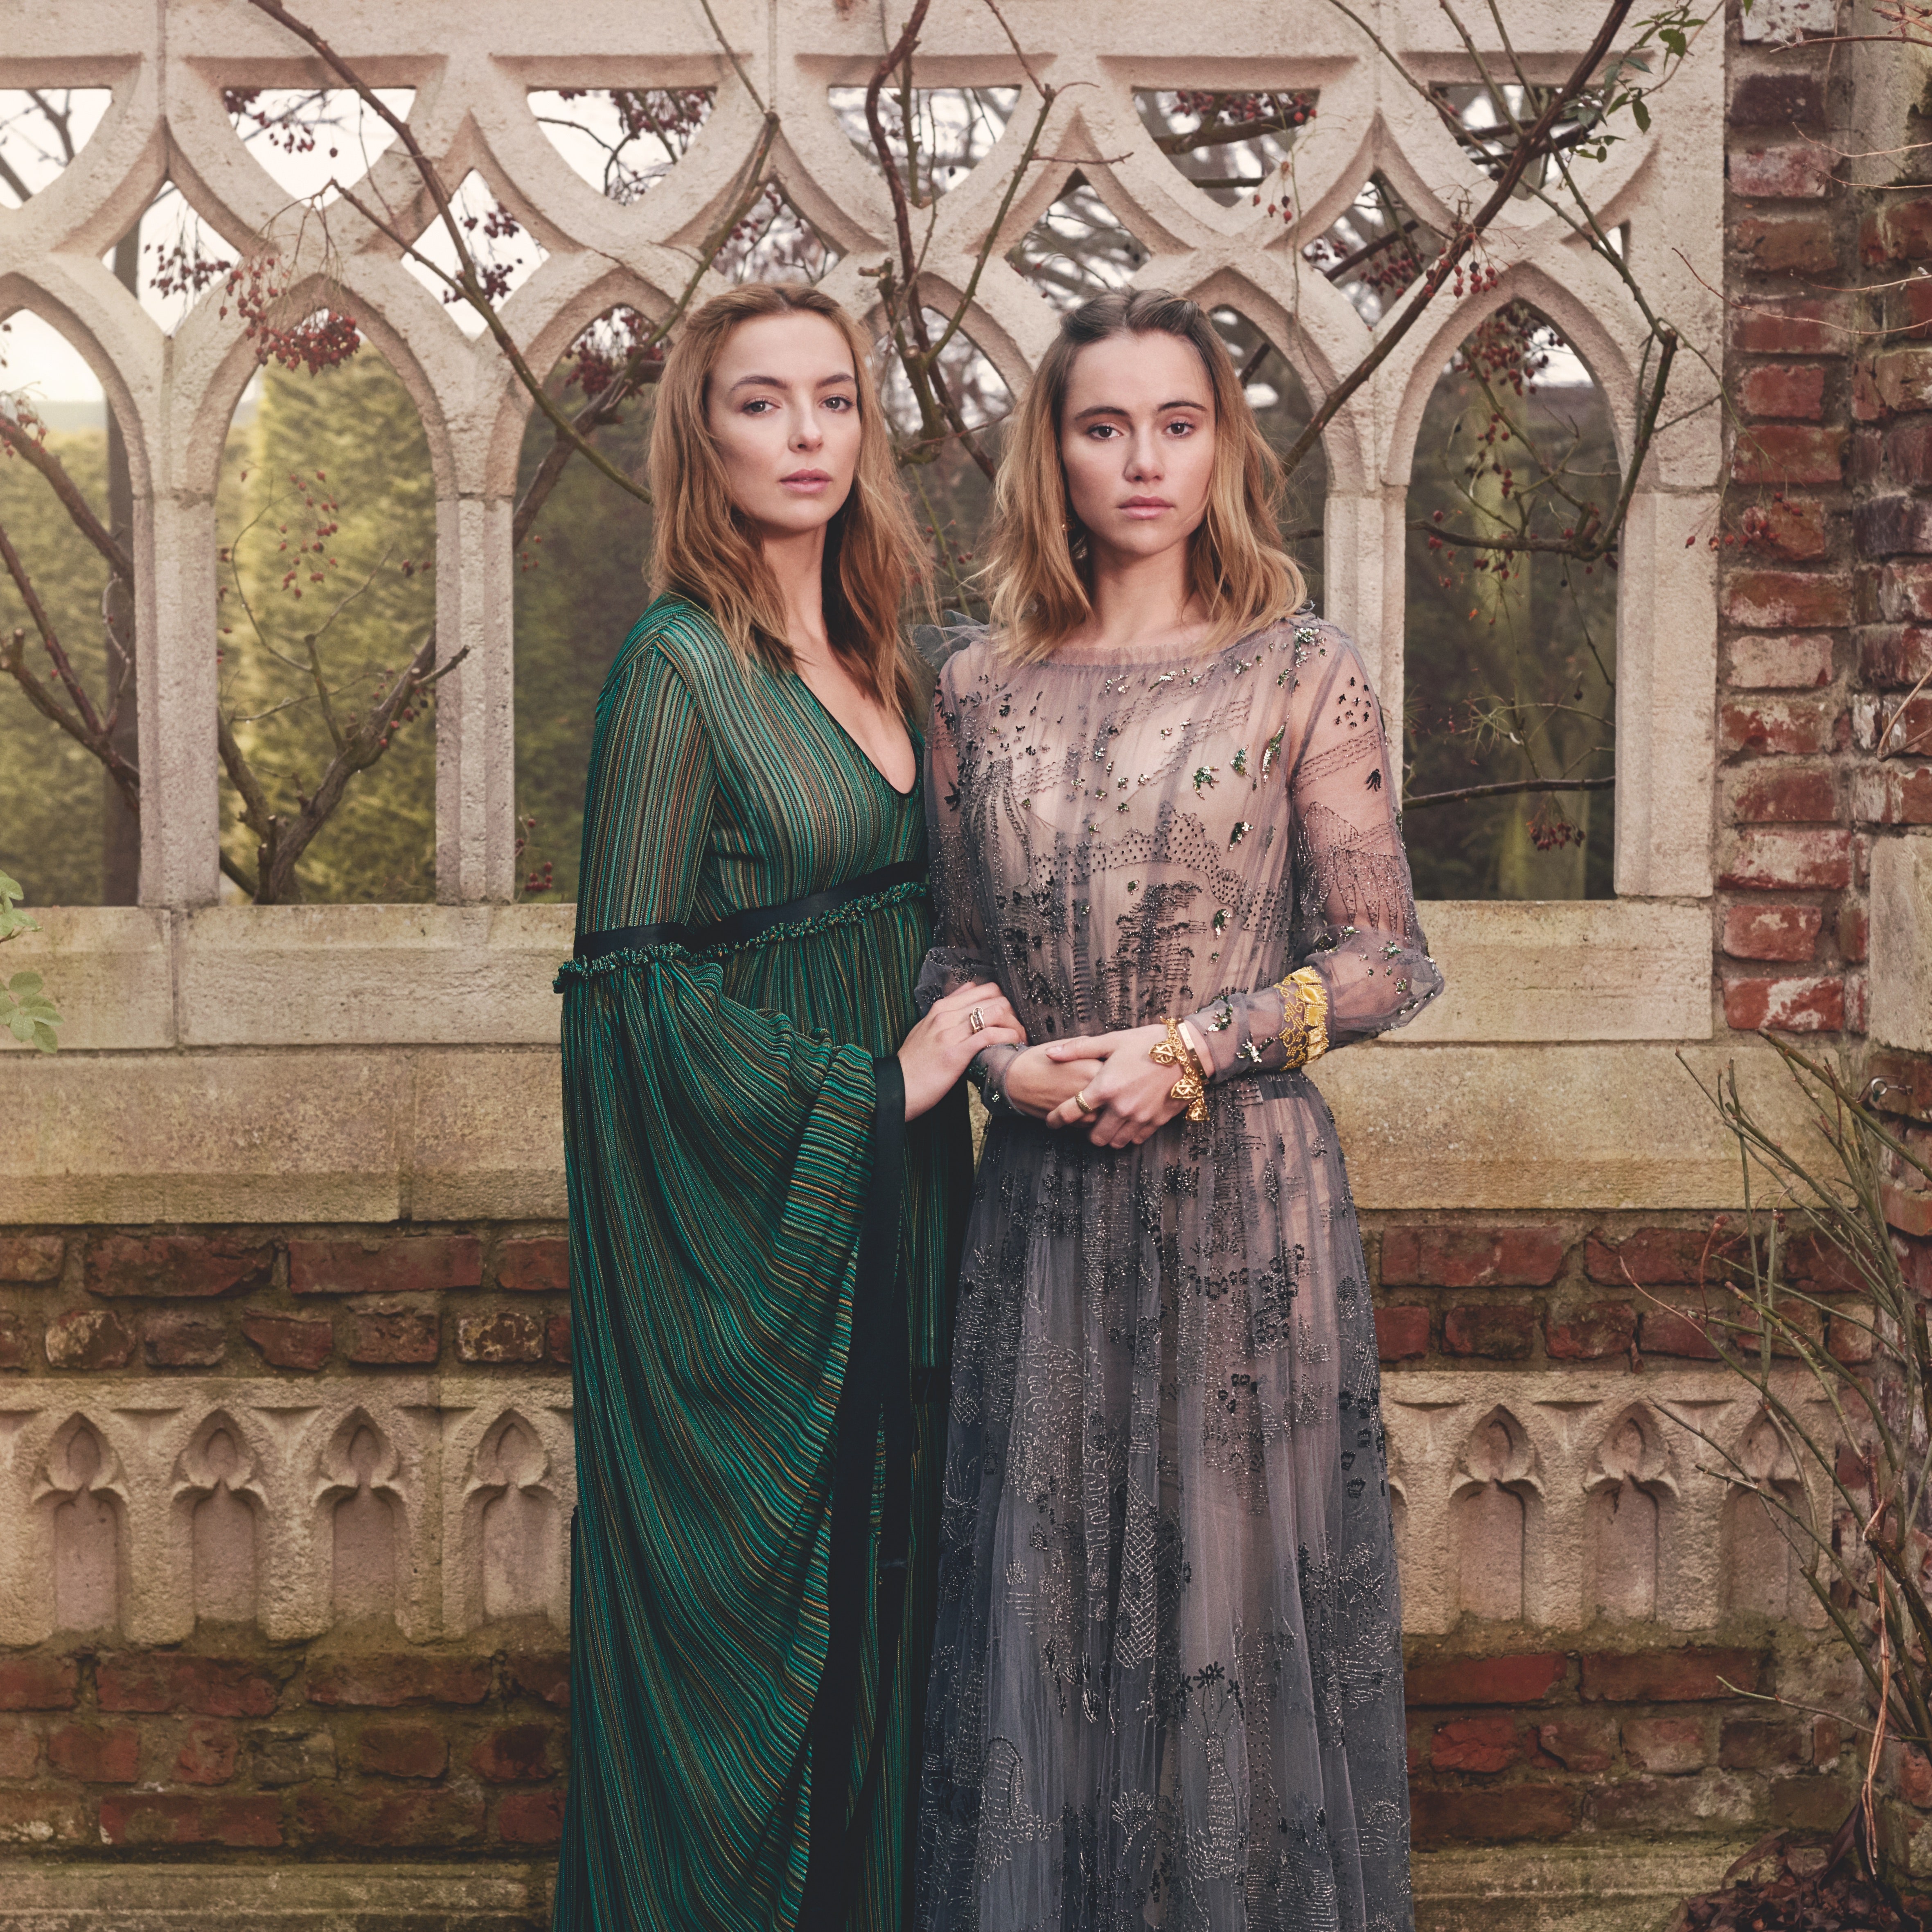 “Freezing Castles & Fitted Corsets”: When Vogue Dressed Period Drama Costars Suki Waterhouse & Jodie Comer In Tudor-Inspired Fashion